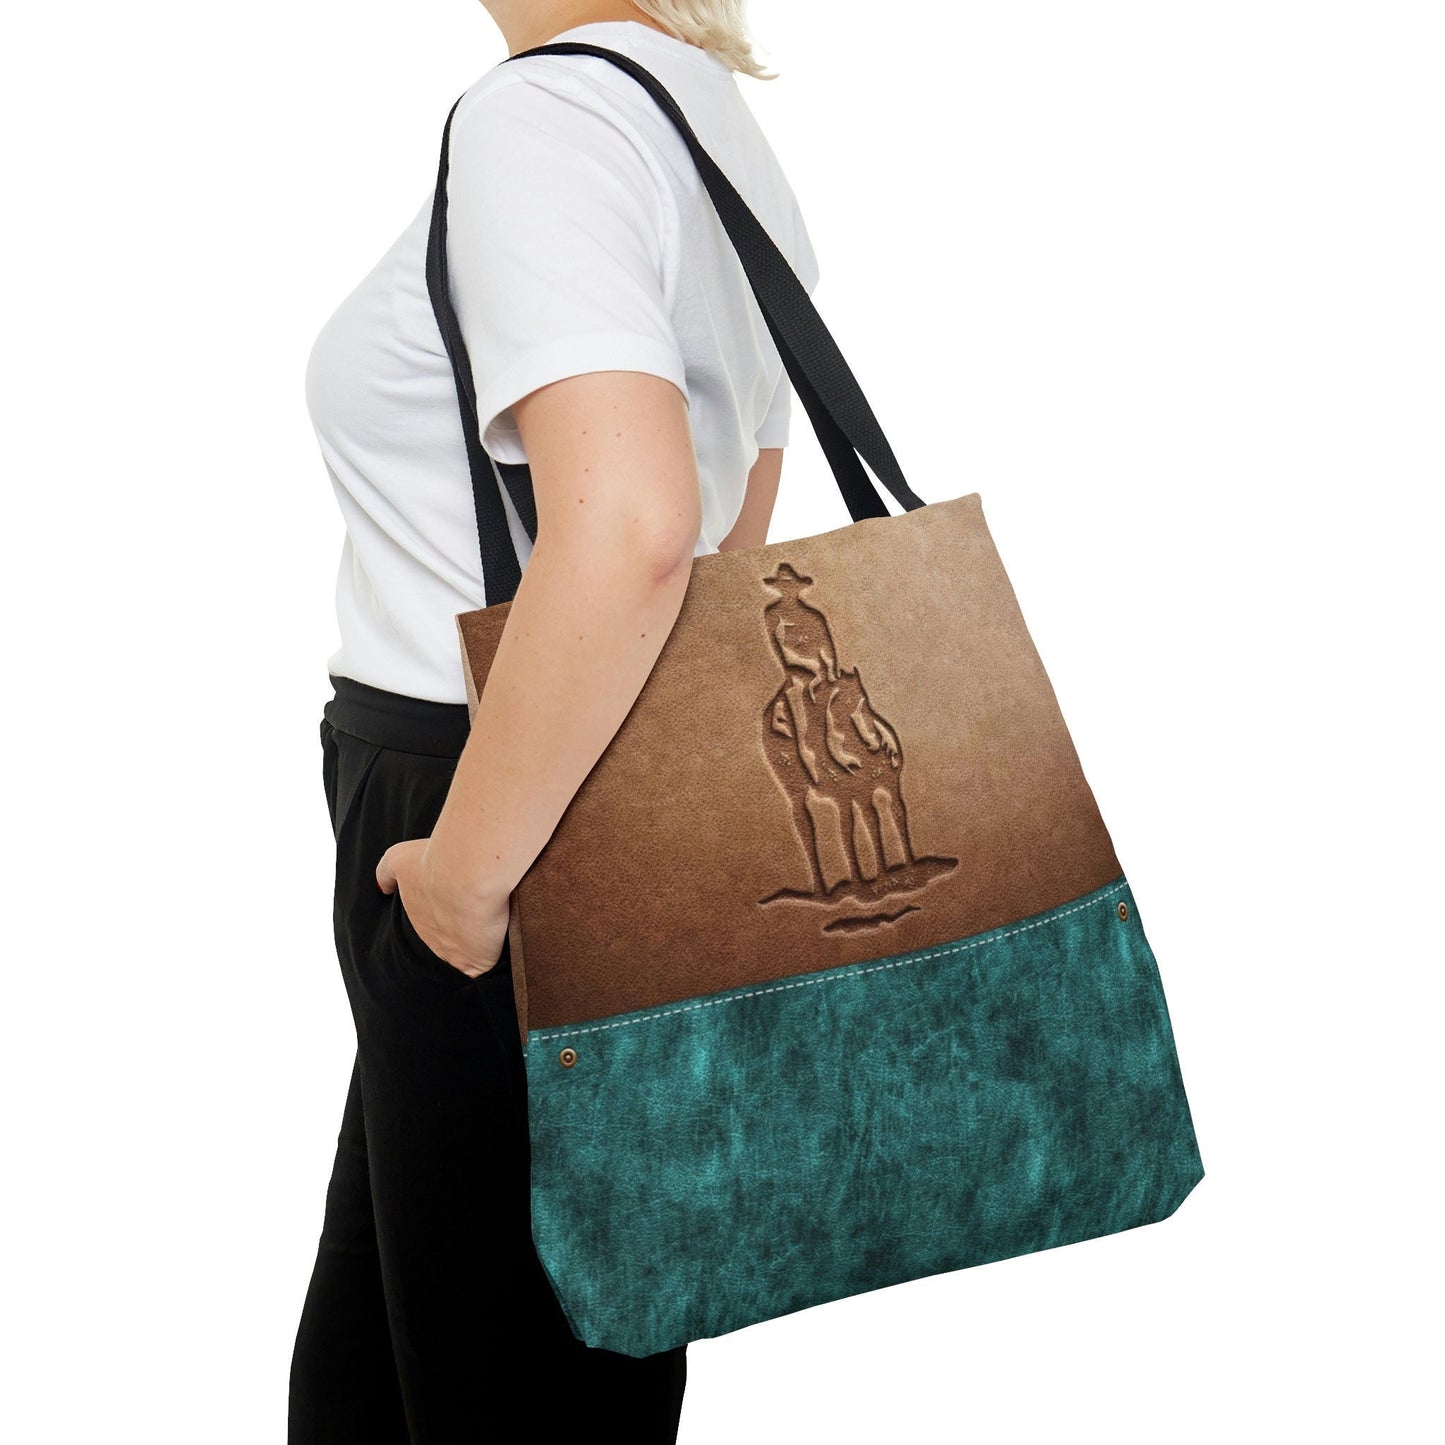 Embossed Cowboy Western Tote Bag Replicates the look of Embossed Leather Ranch Gifts Custom Designed Cowgirl Leather Polyester Tote Bag